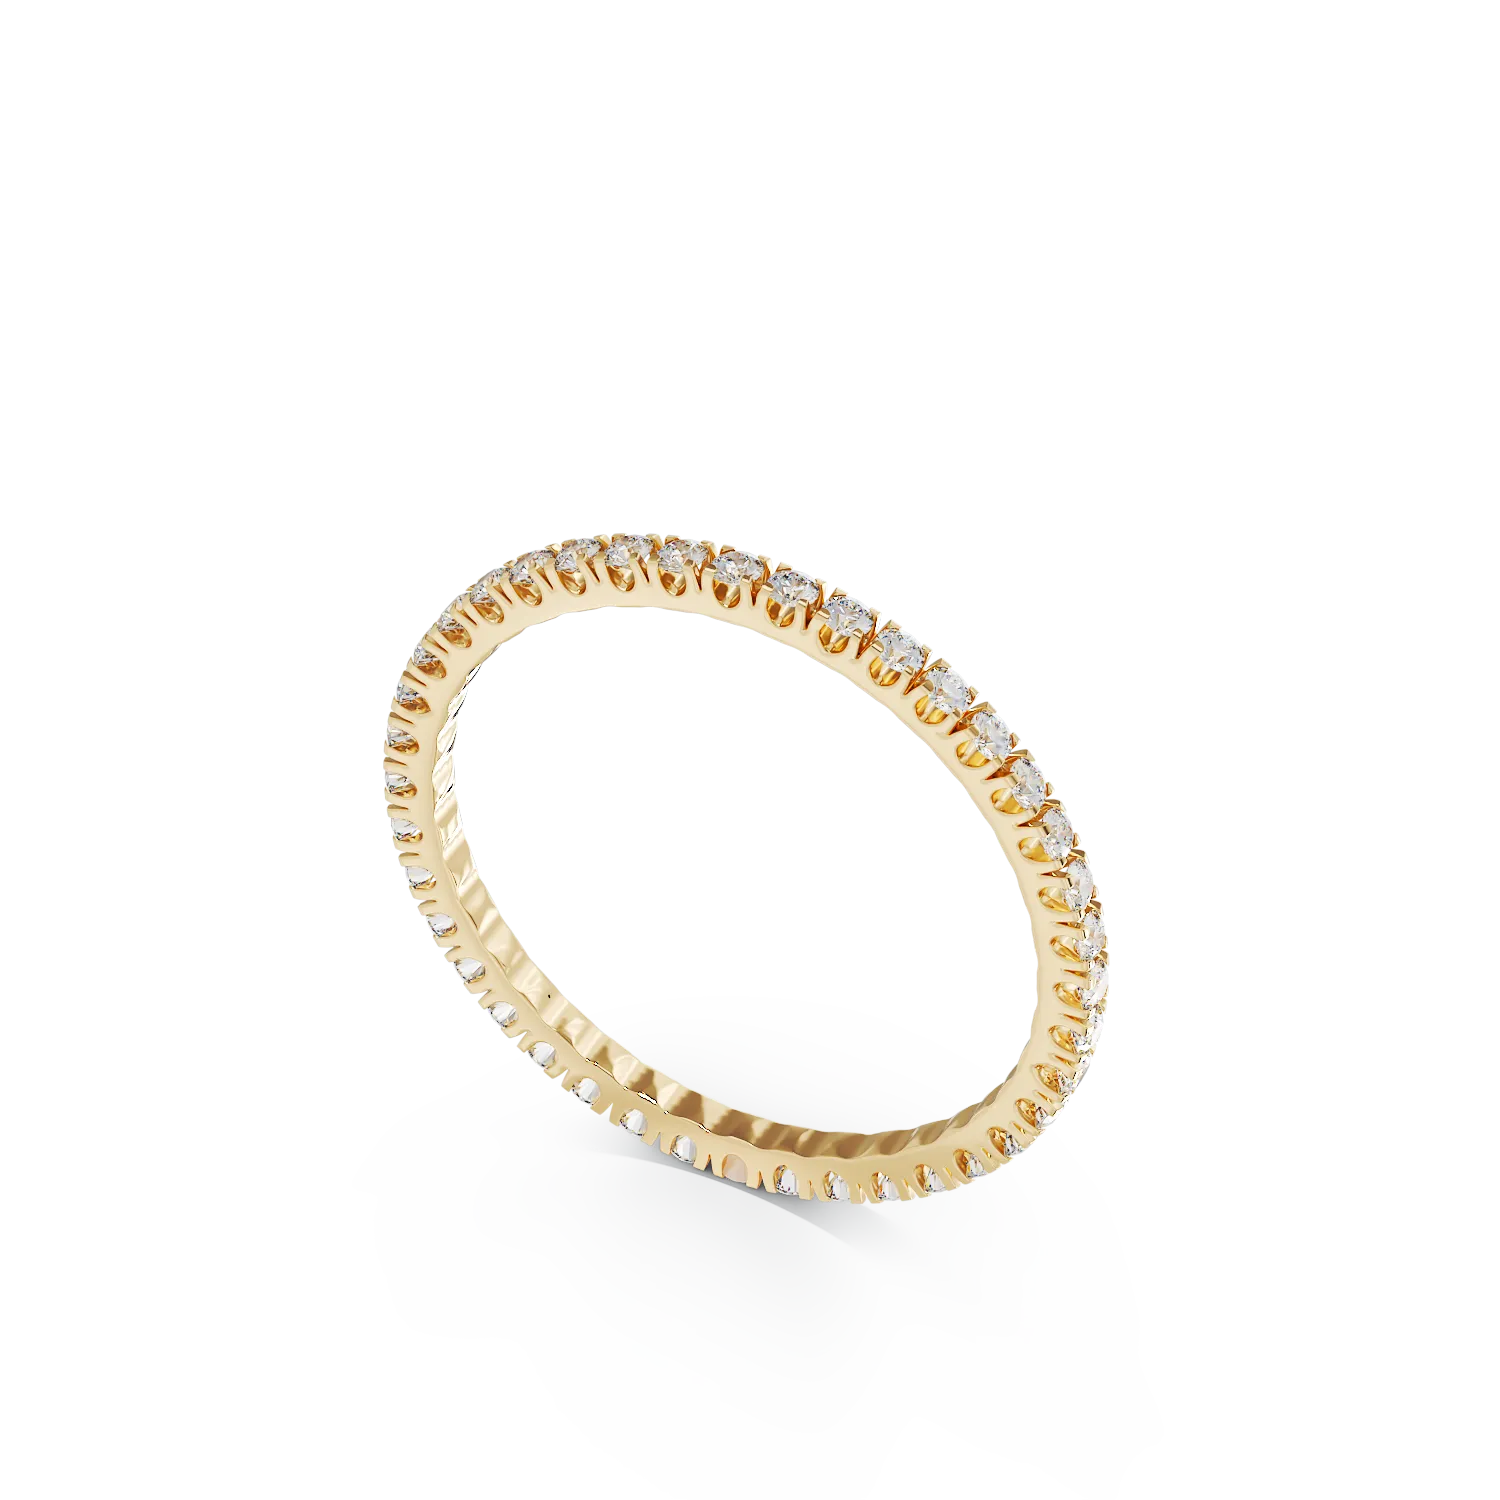 Eternity ring in yellow gold with 0.5ct diamonds